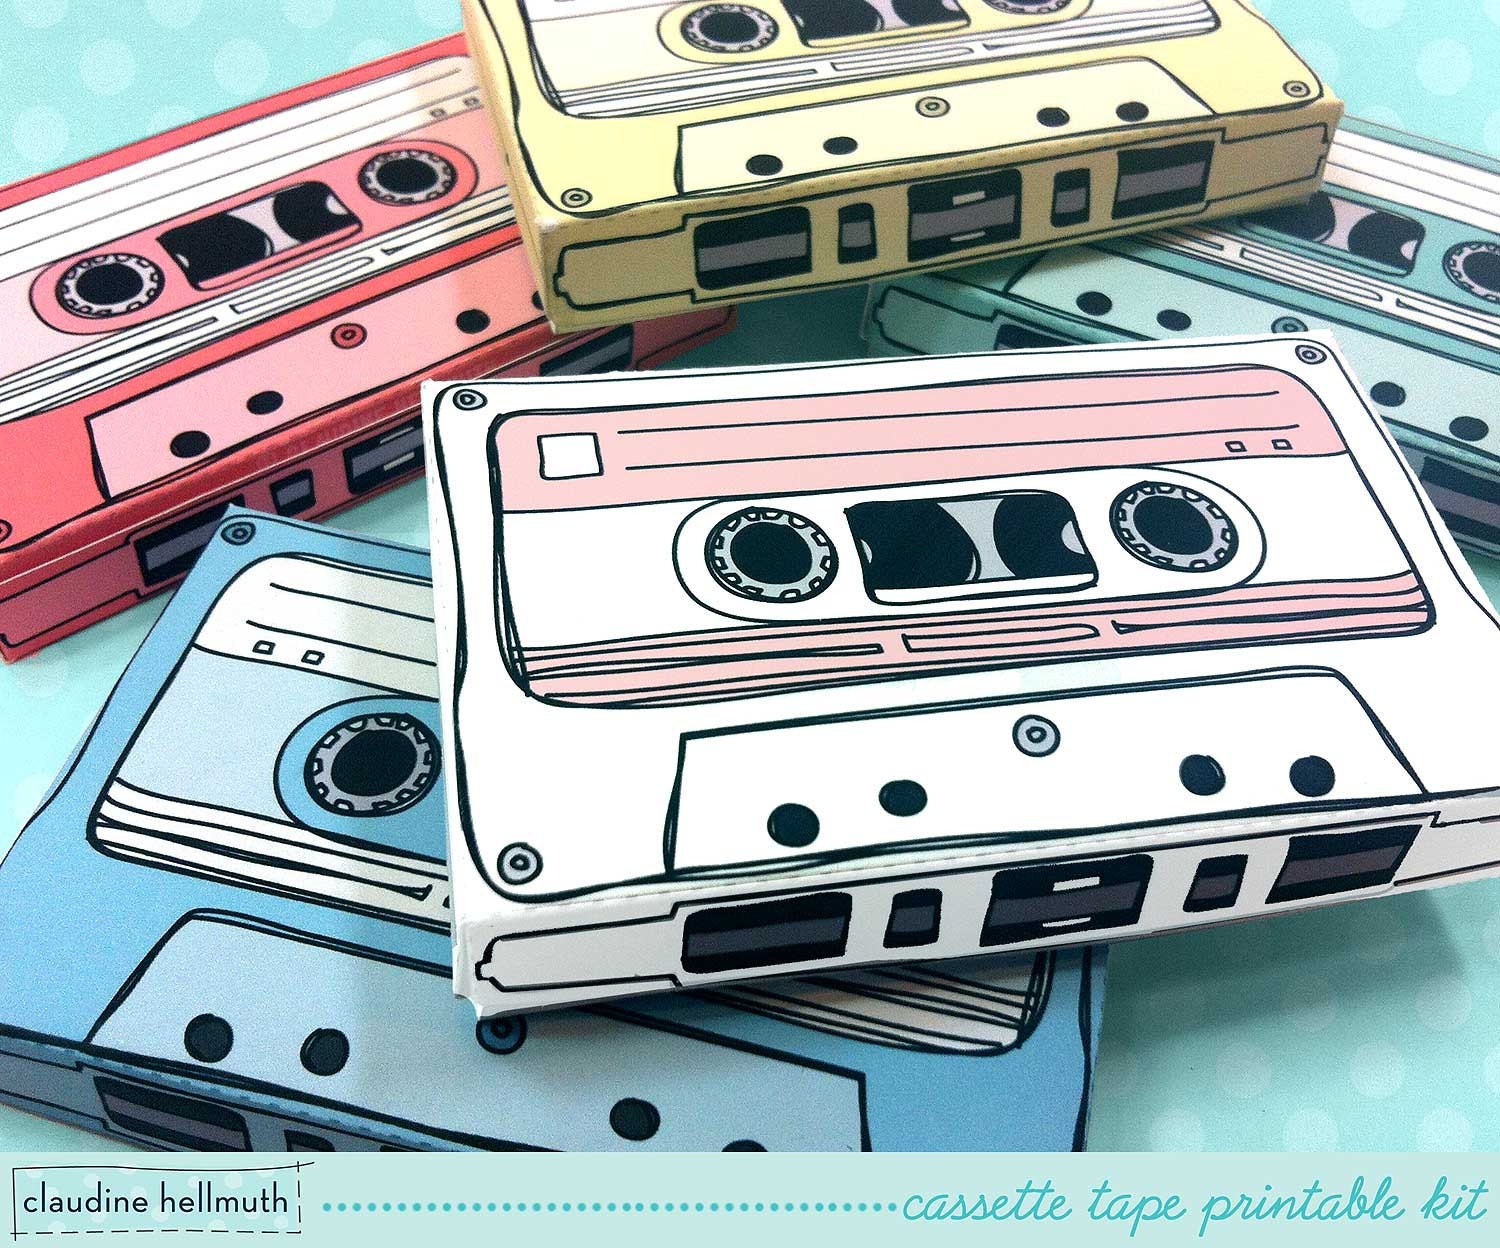 cassette tapes -  gift card holders, party favor boxes, paper toy printable PDF kit - INSTANT download